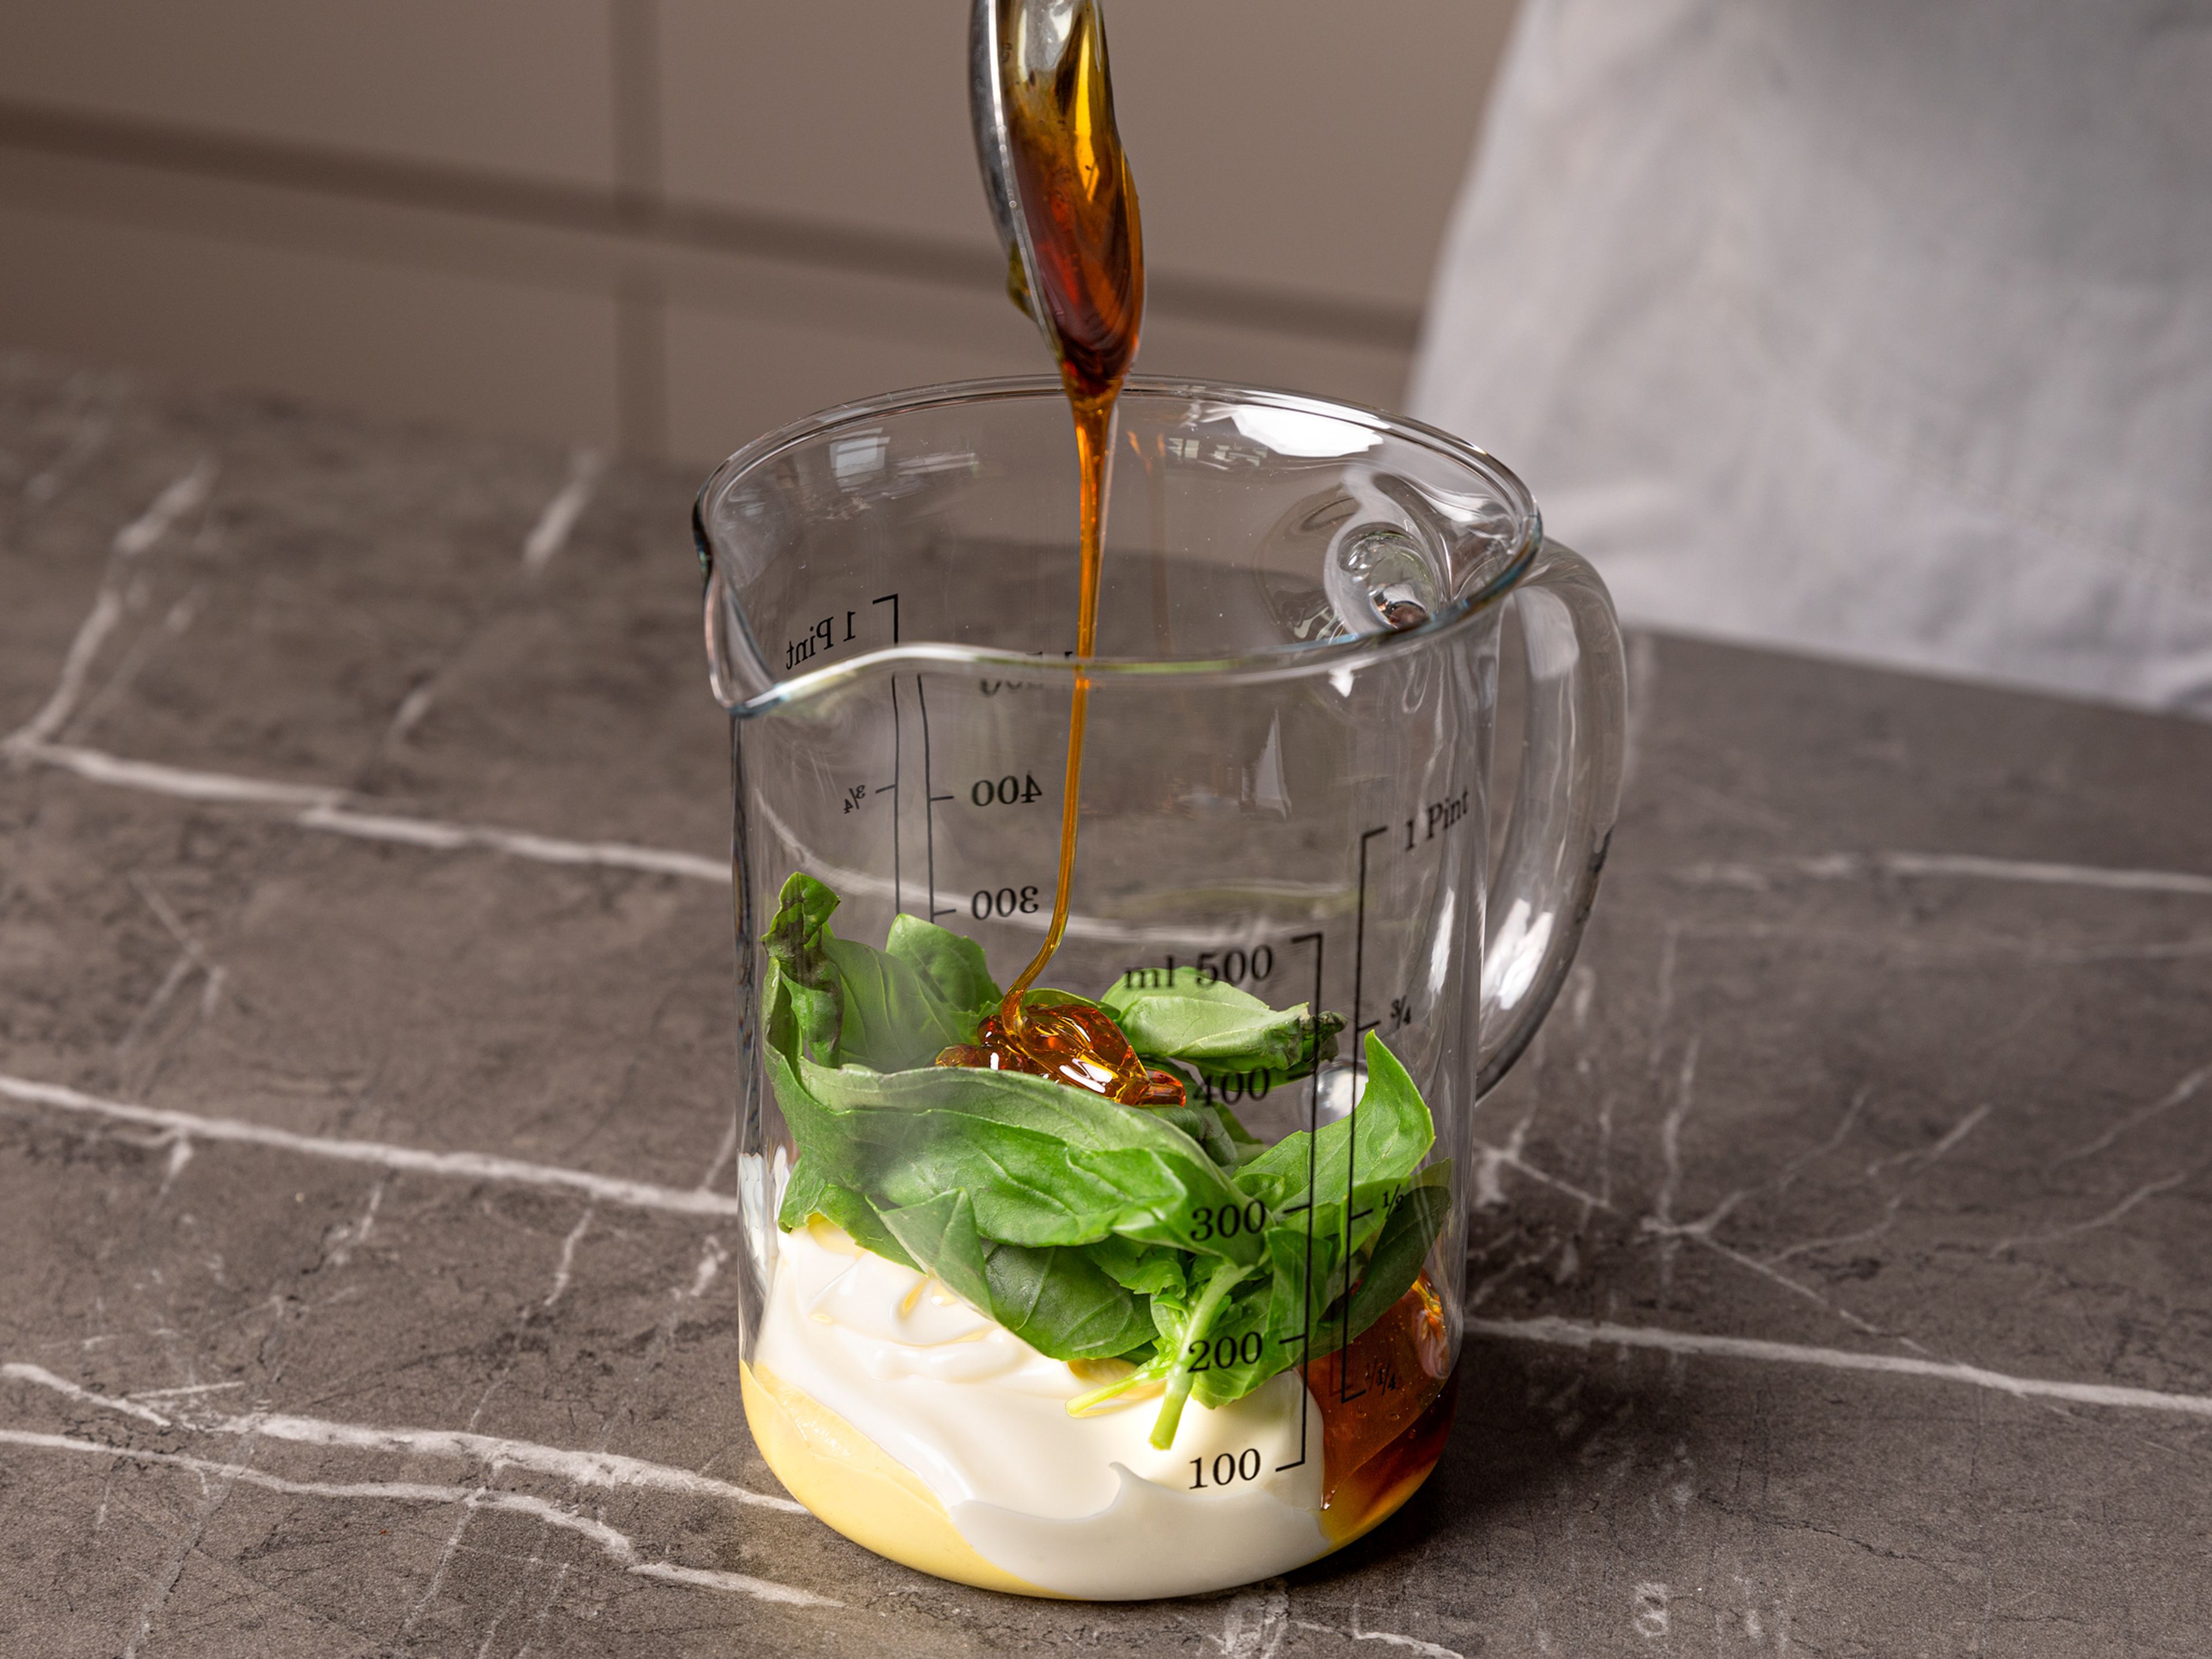 Meanwhile, boil the eggs until the yolk is slightly runny, for approx. 6-8 min. Prepare the dip: In a mixing bowl, use an immersion blender to purée the basil with the juice of half a lemon, mayonnaise, mustard, honey to a smooth dip. Season with salt and pepper.